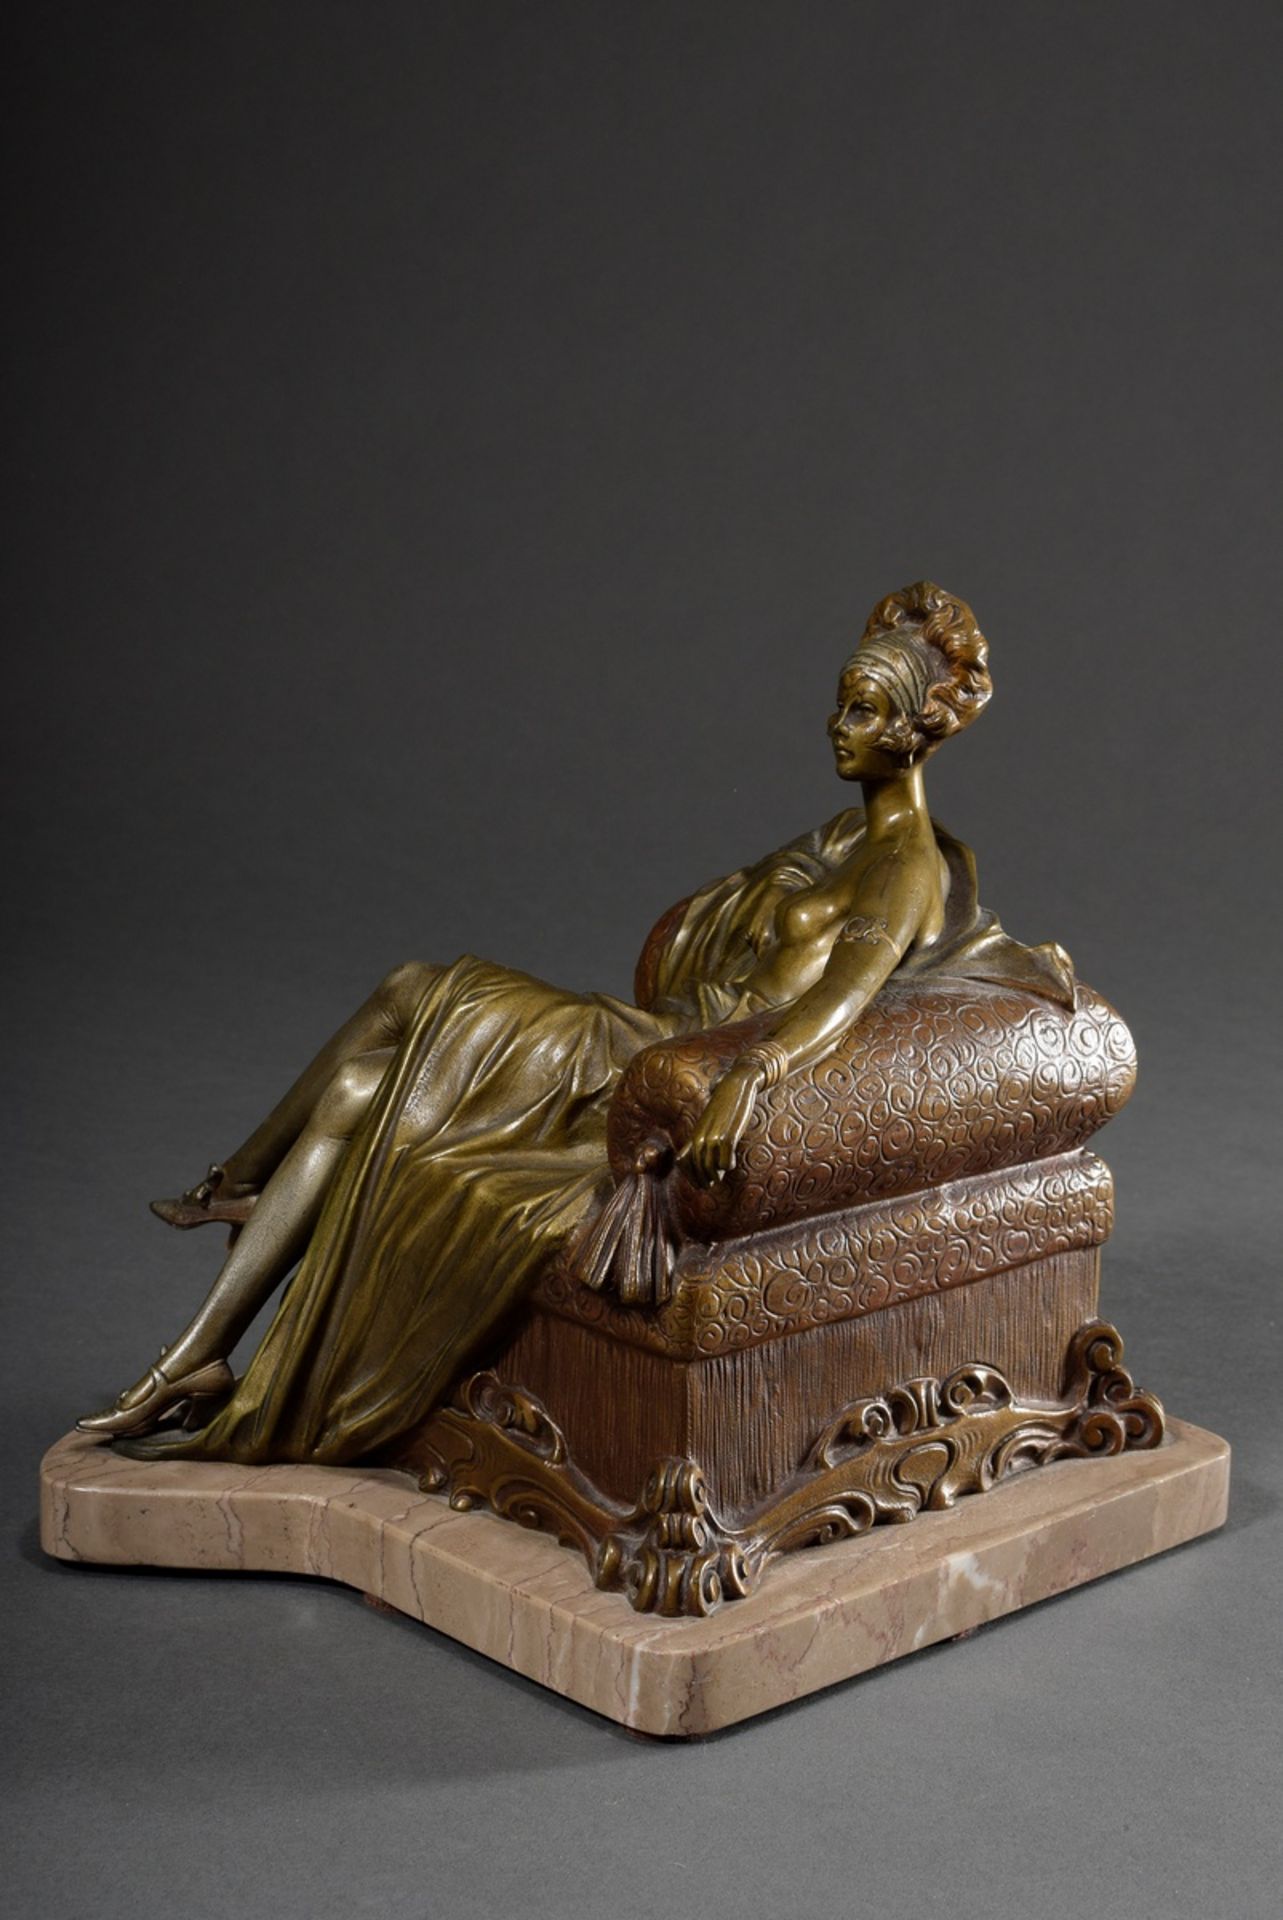 Unknown artist c. 1920 "Lascivious lady on armchair", bronze with various patinas on reddish marble - Image 7 of 8